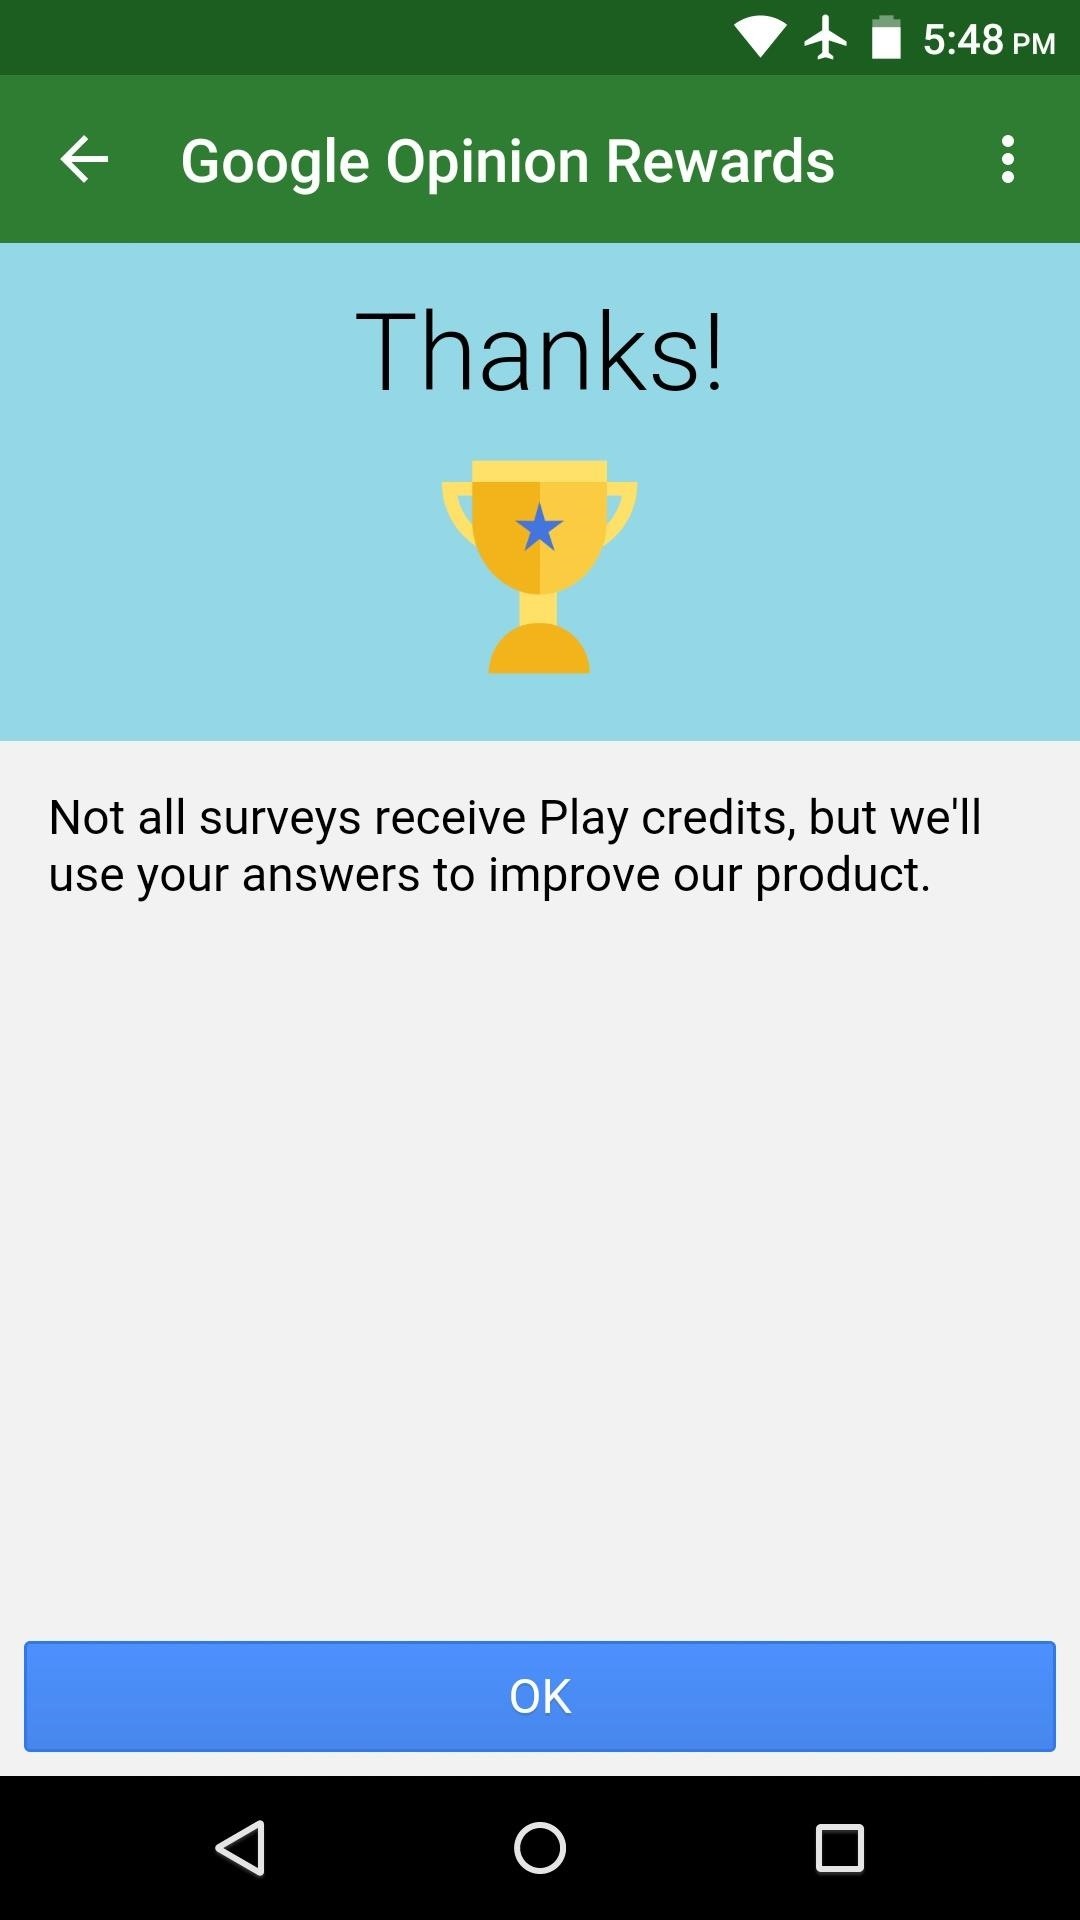 How to Earn Free Google Play Credits on Android by Filling Out Surveys